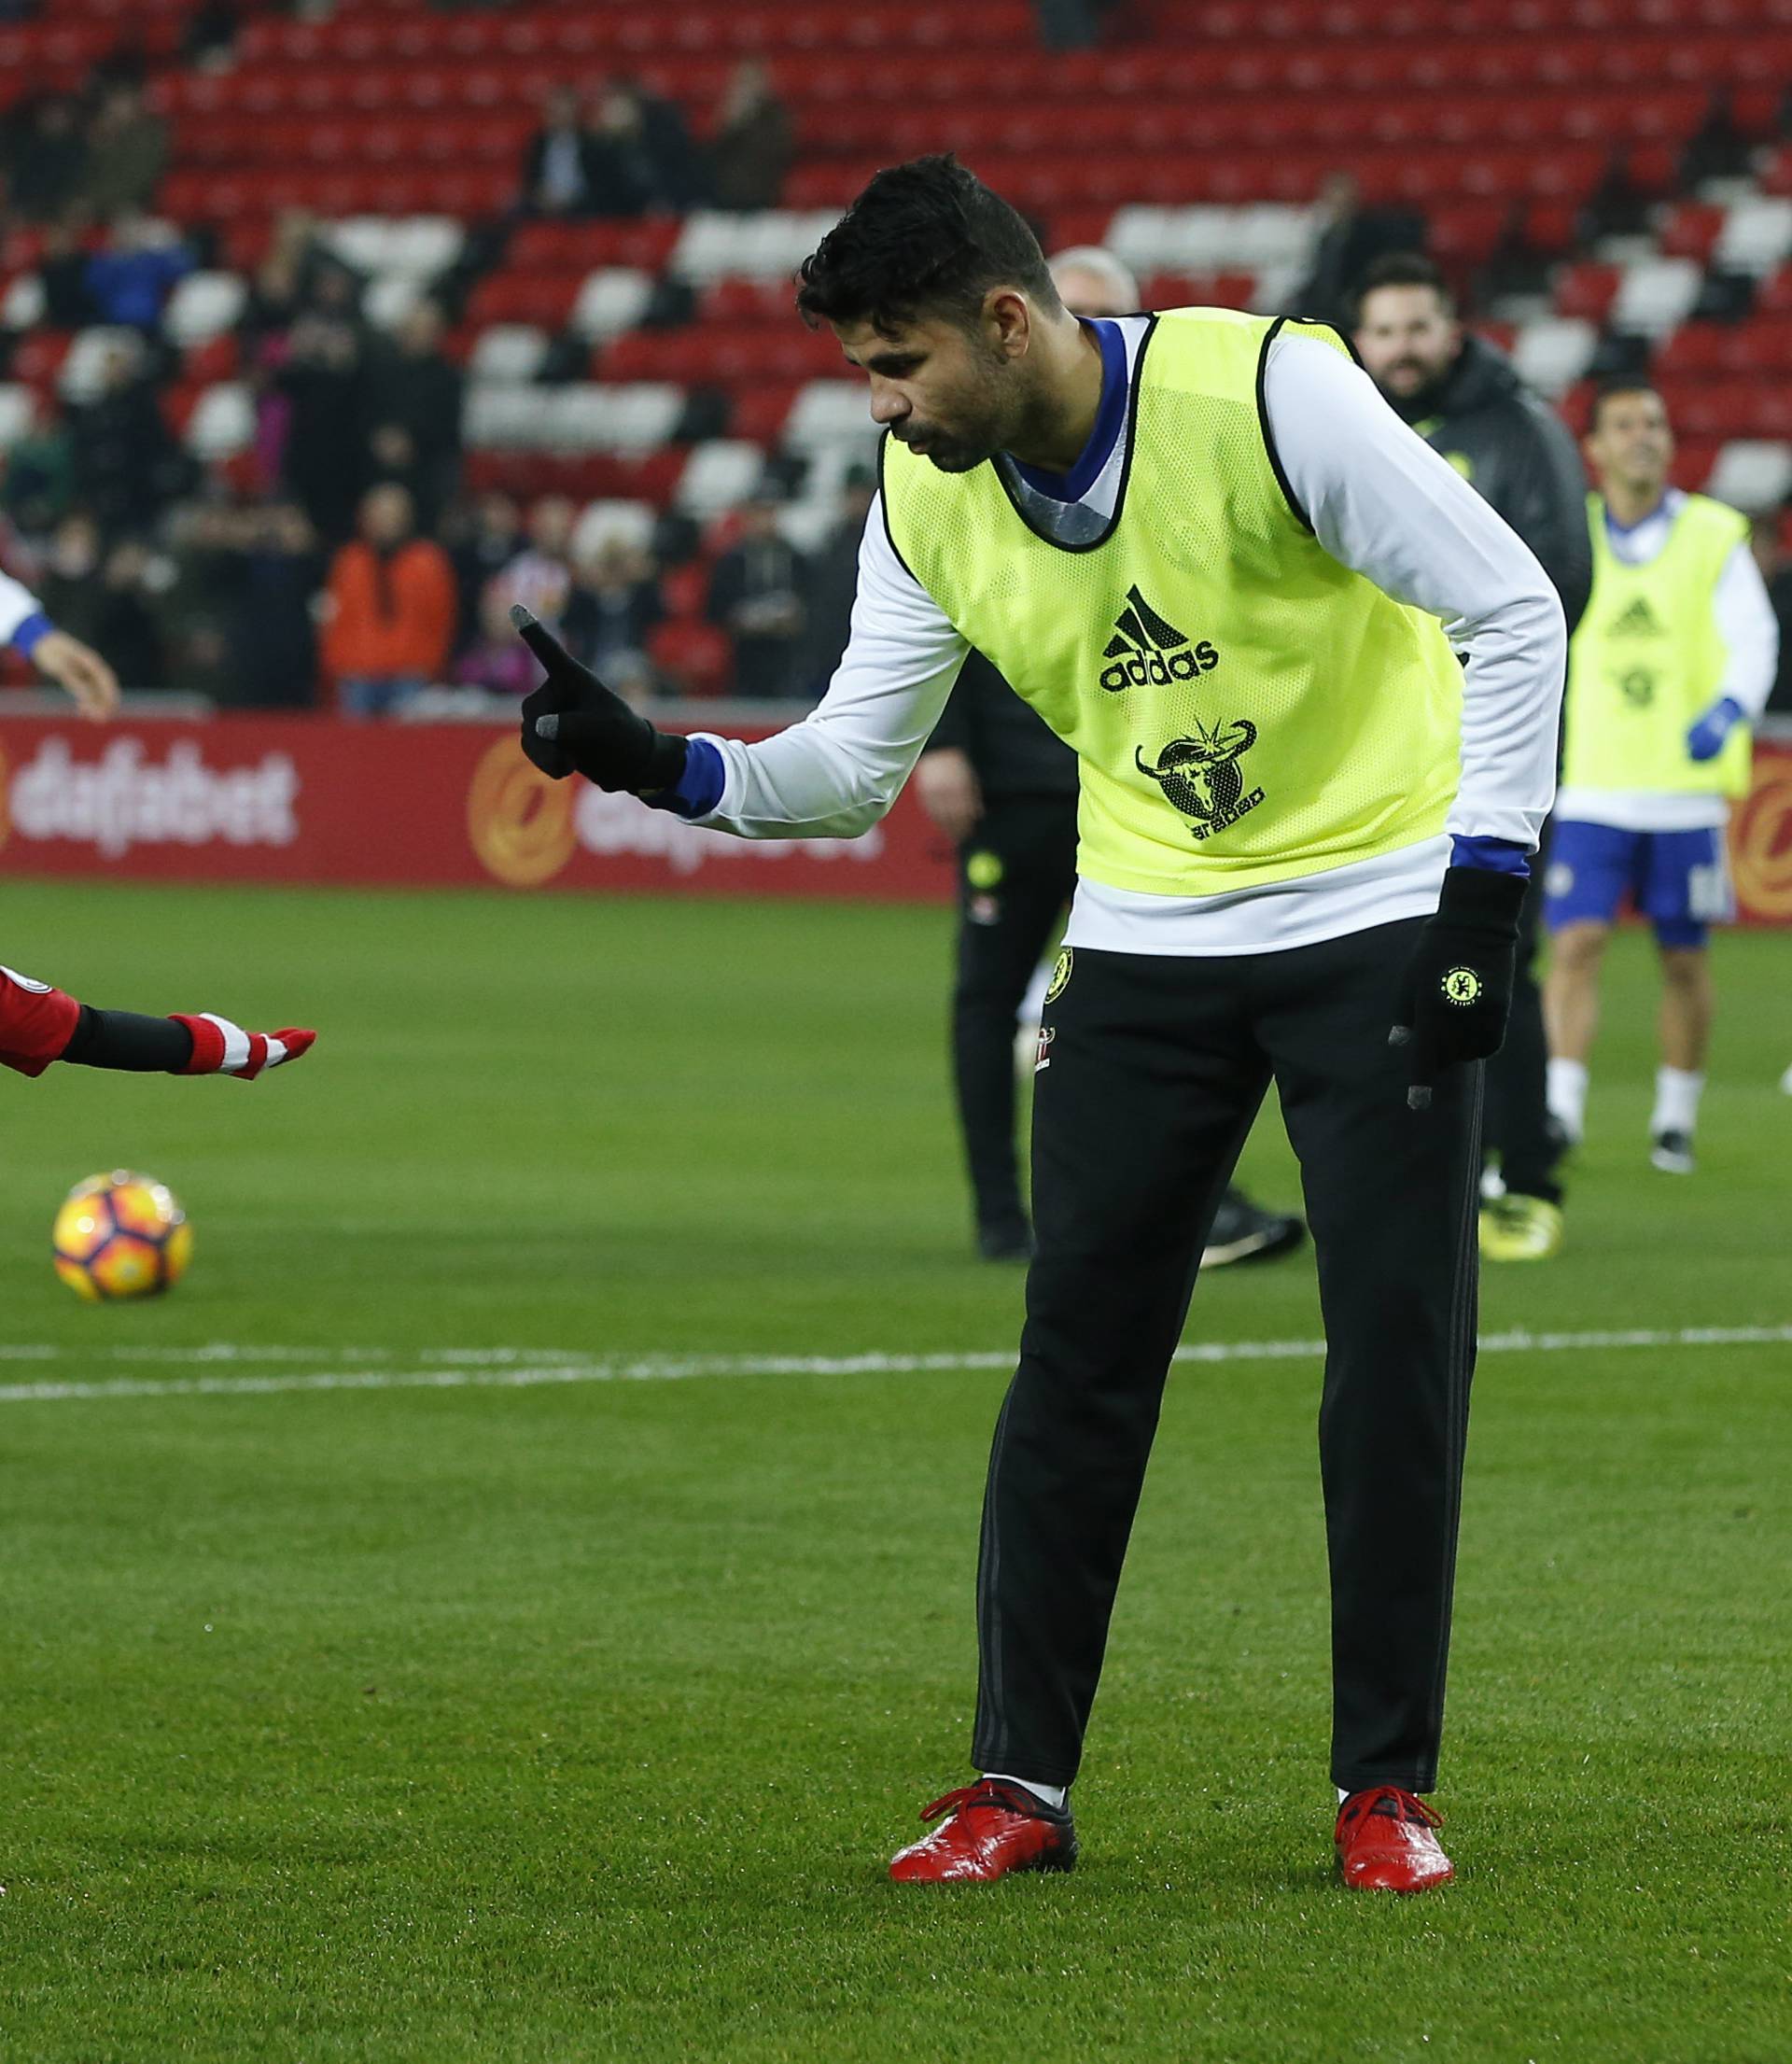 Chelsea's Diego Costa with Sunderland mascot Bradley Lowery before the game